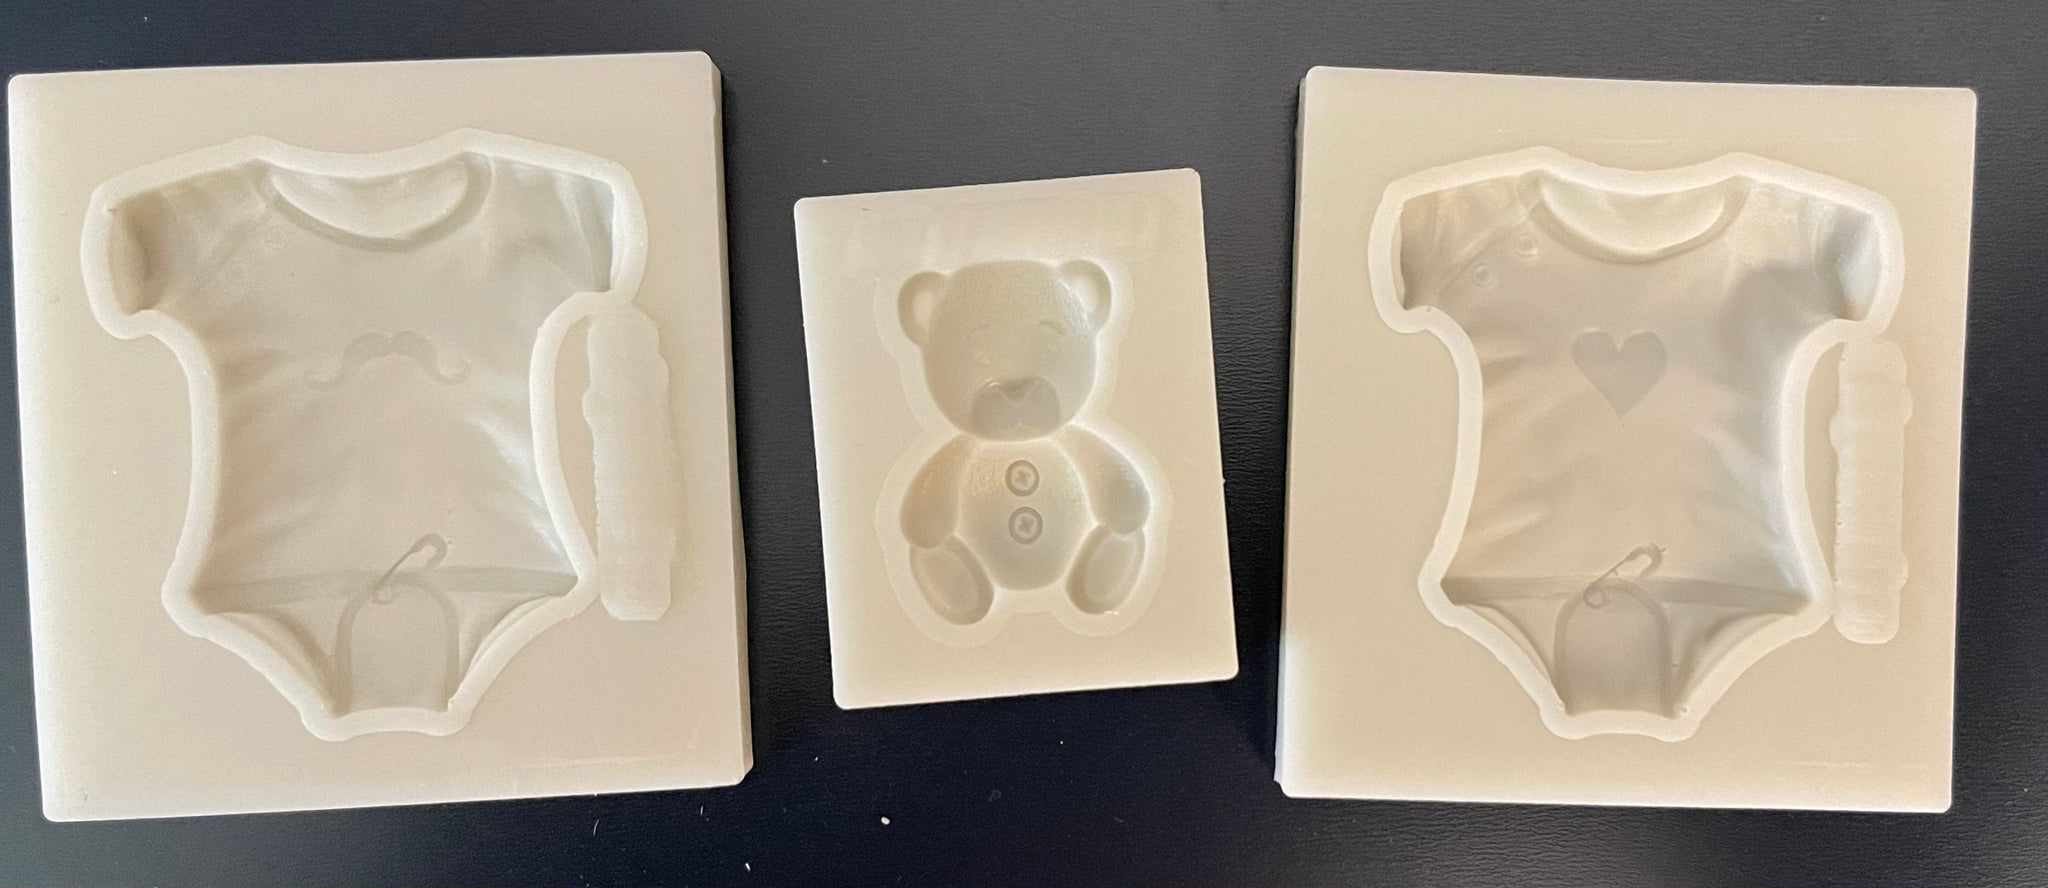 Baby One piece and Bear Mold Set